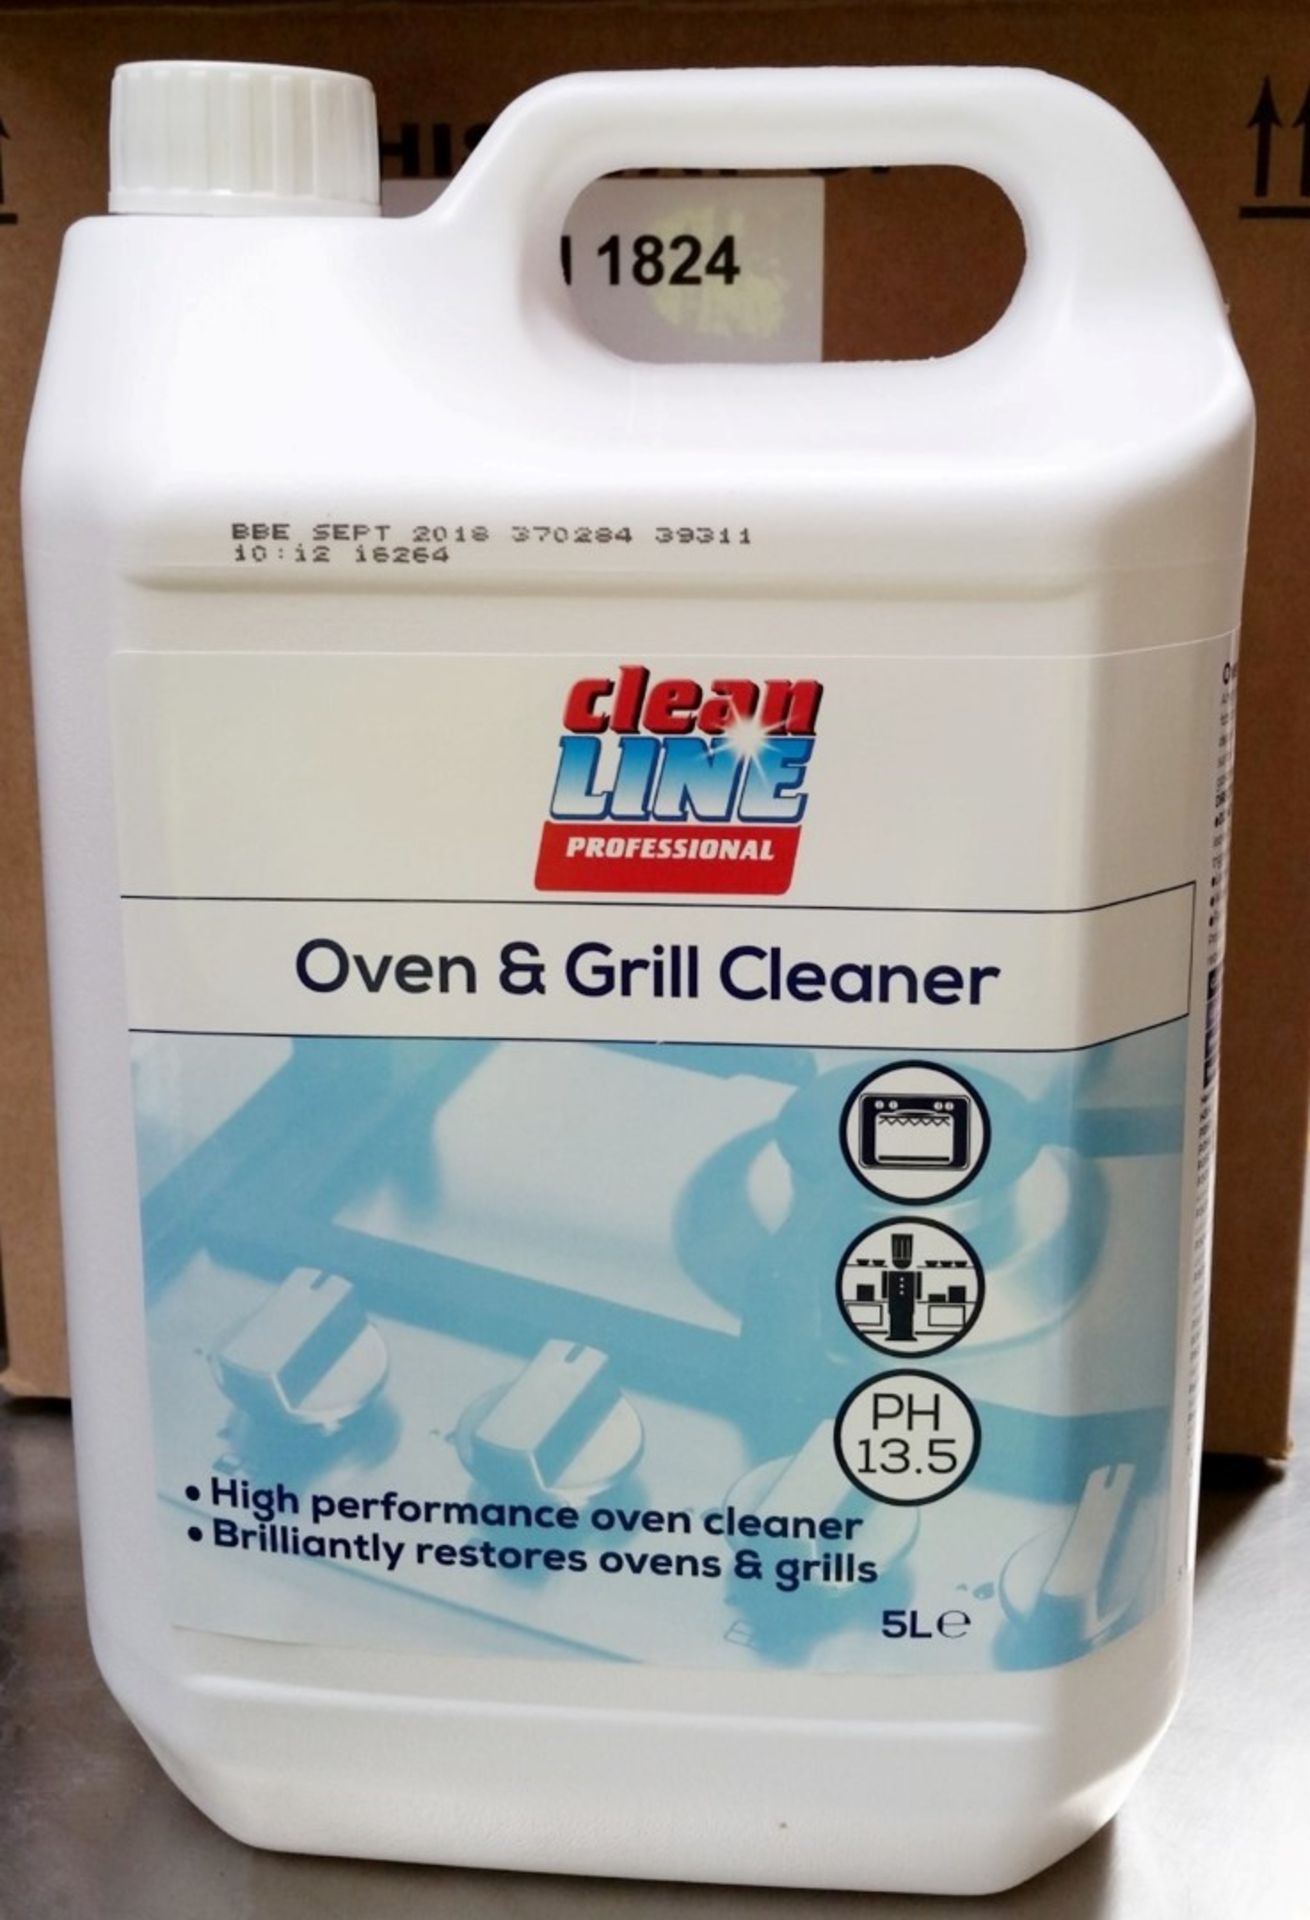 2 x Clean Line Professional 5 Litre Oven & Grill Cleaner - High Performance Oven Cleaner -